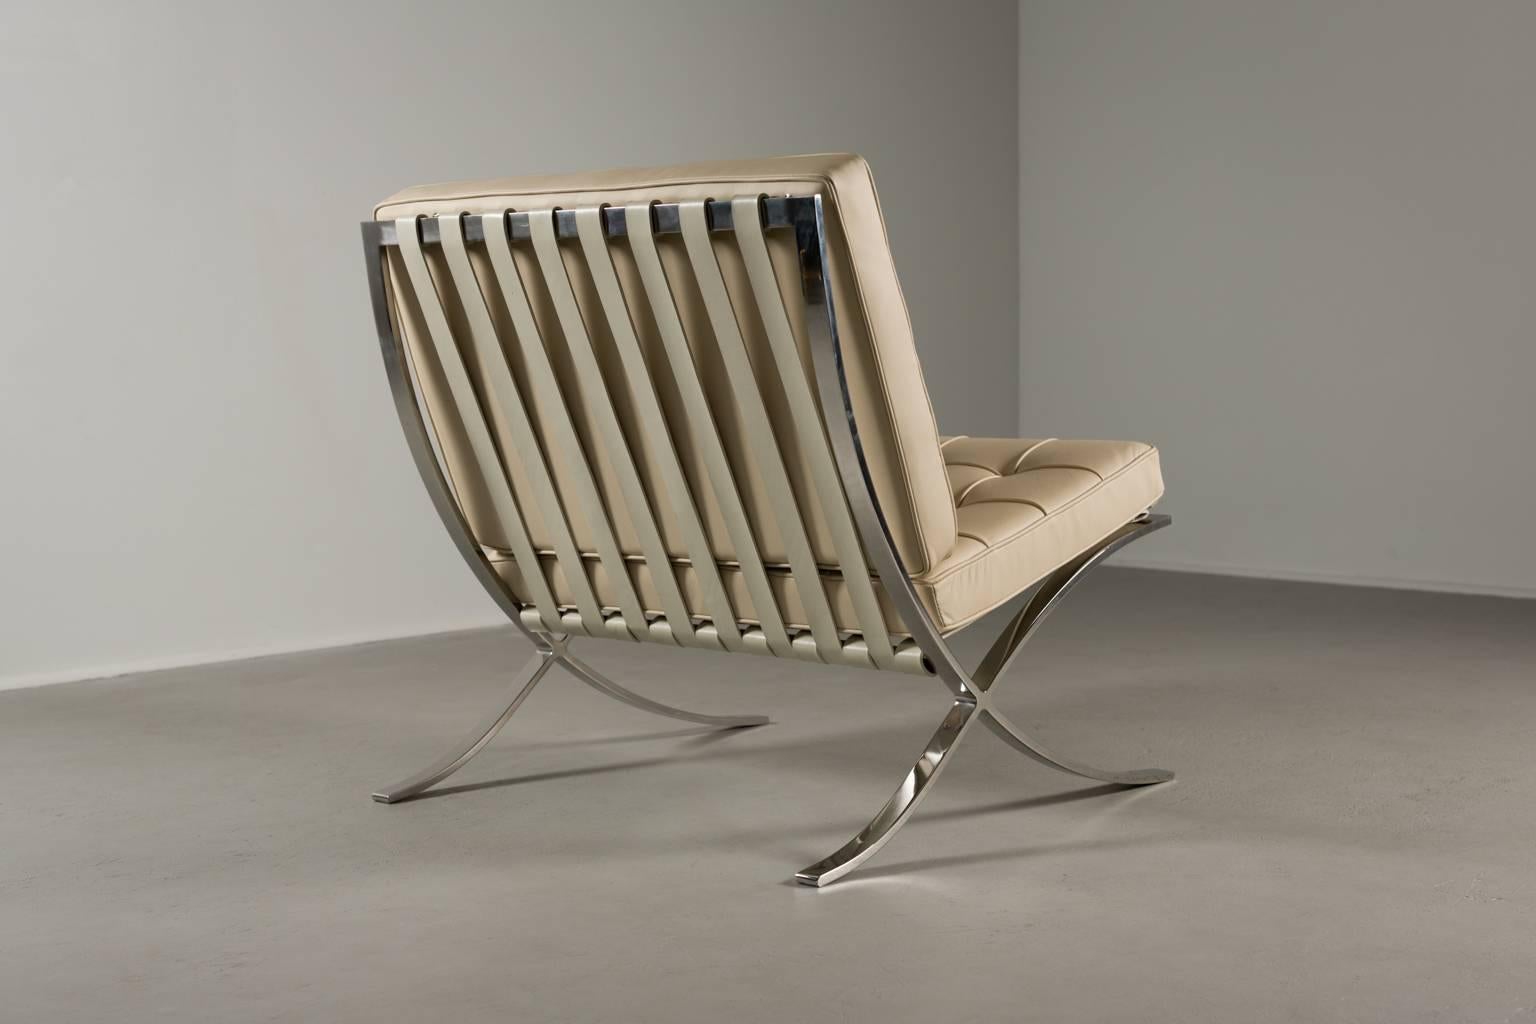 American Ludwig Mies van der Rohe for Knoll 